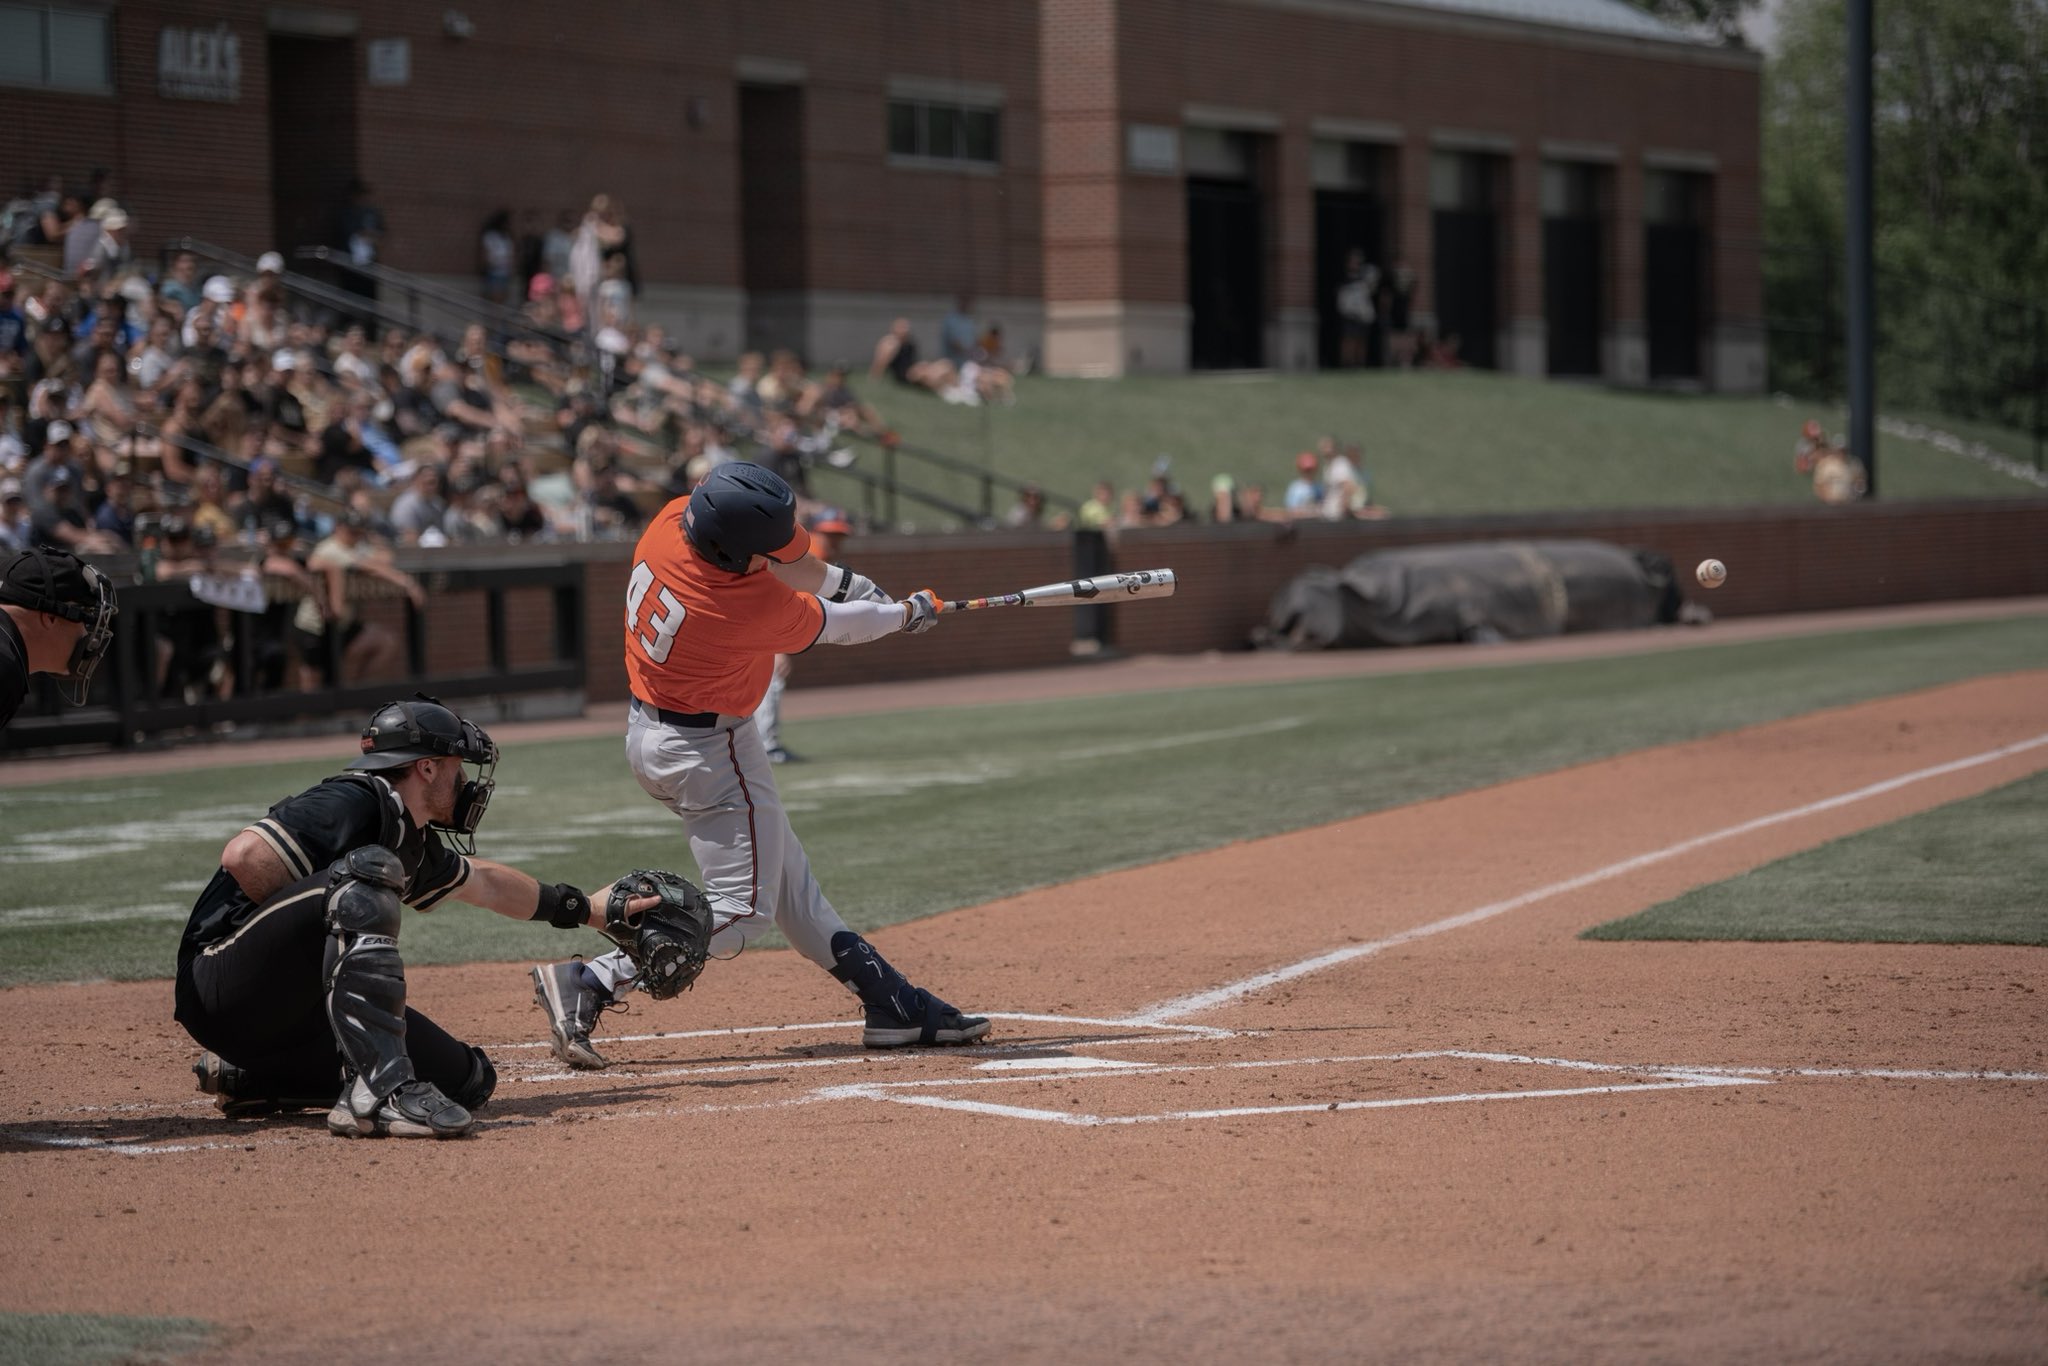 Illini’s Drake Westcott Hits Two Home Runs in Same Inning in 18-10 Win at Purdue